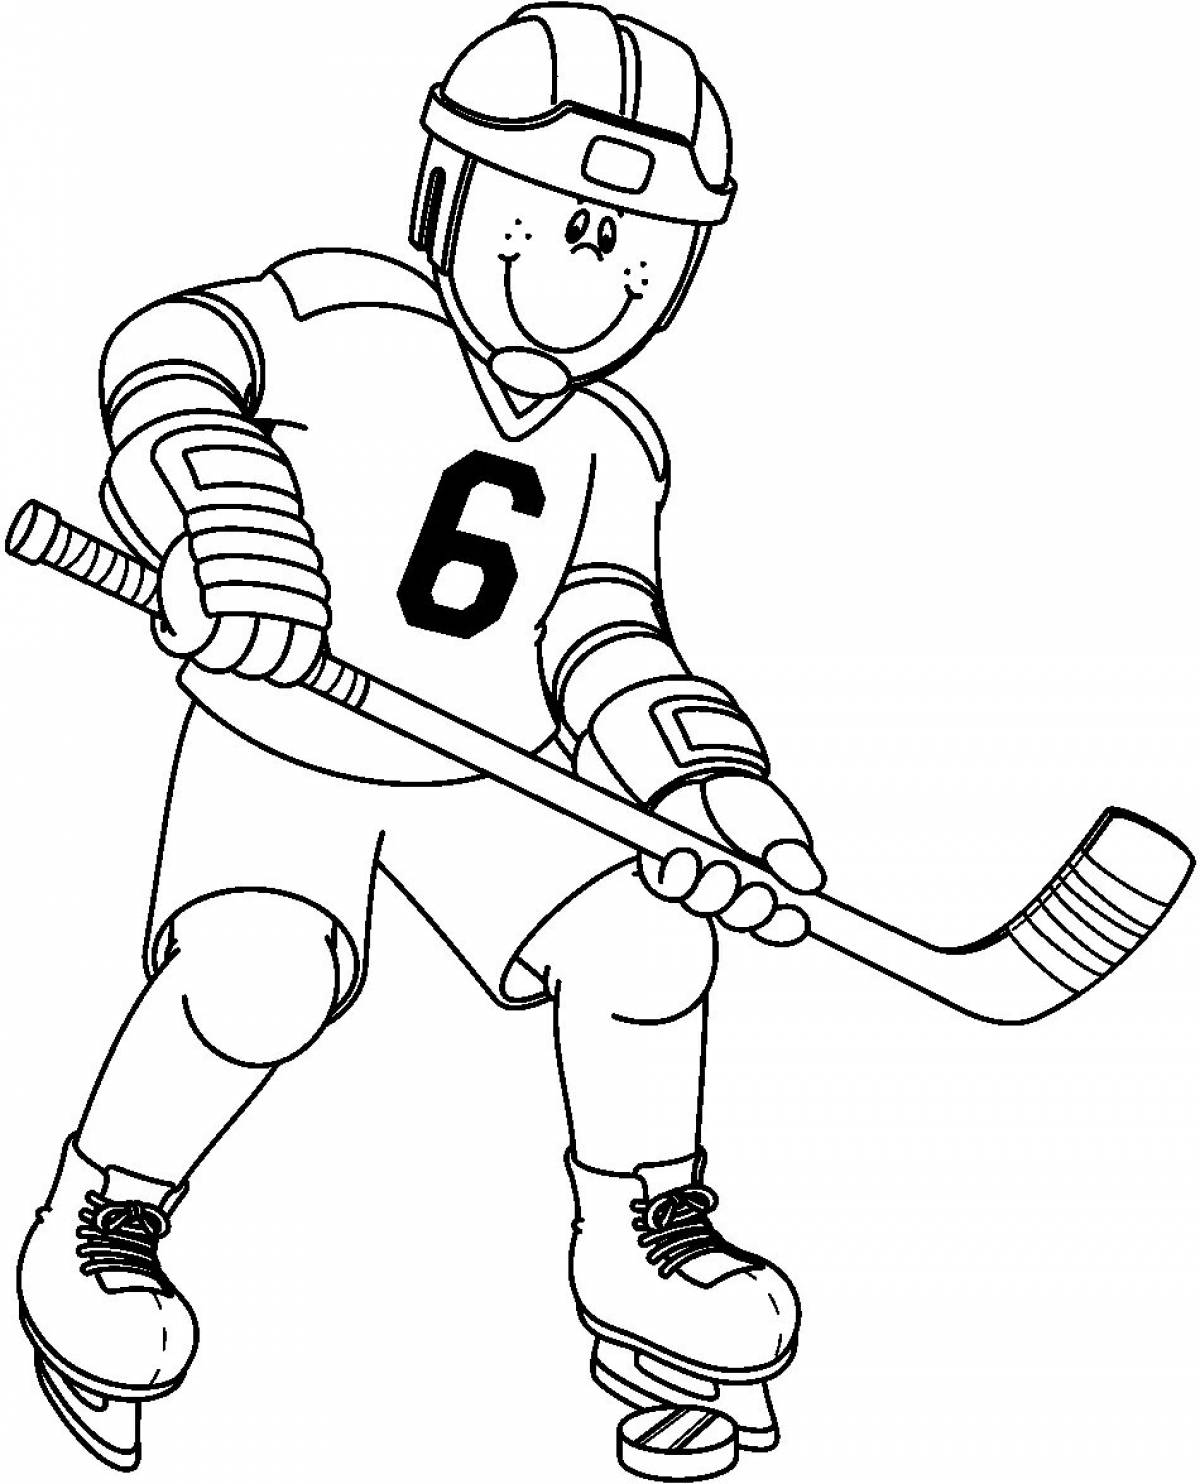 Coloring book amazing ovechkin